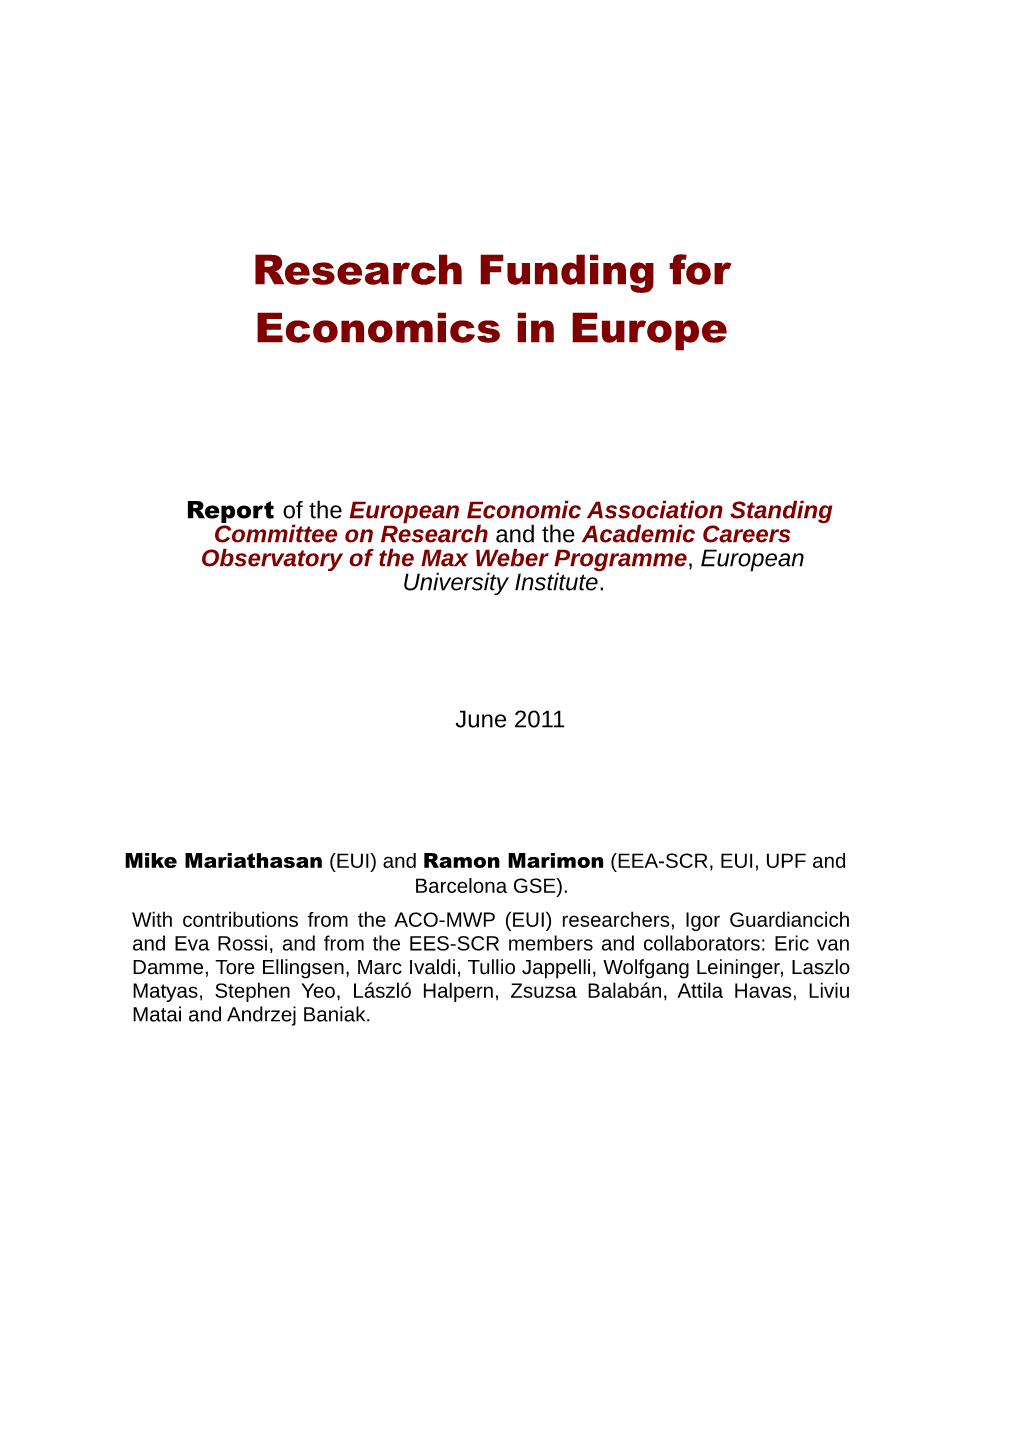 Research Funding for Economics in Europe